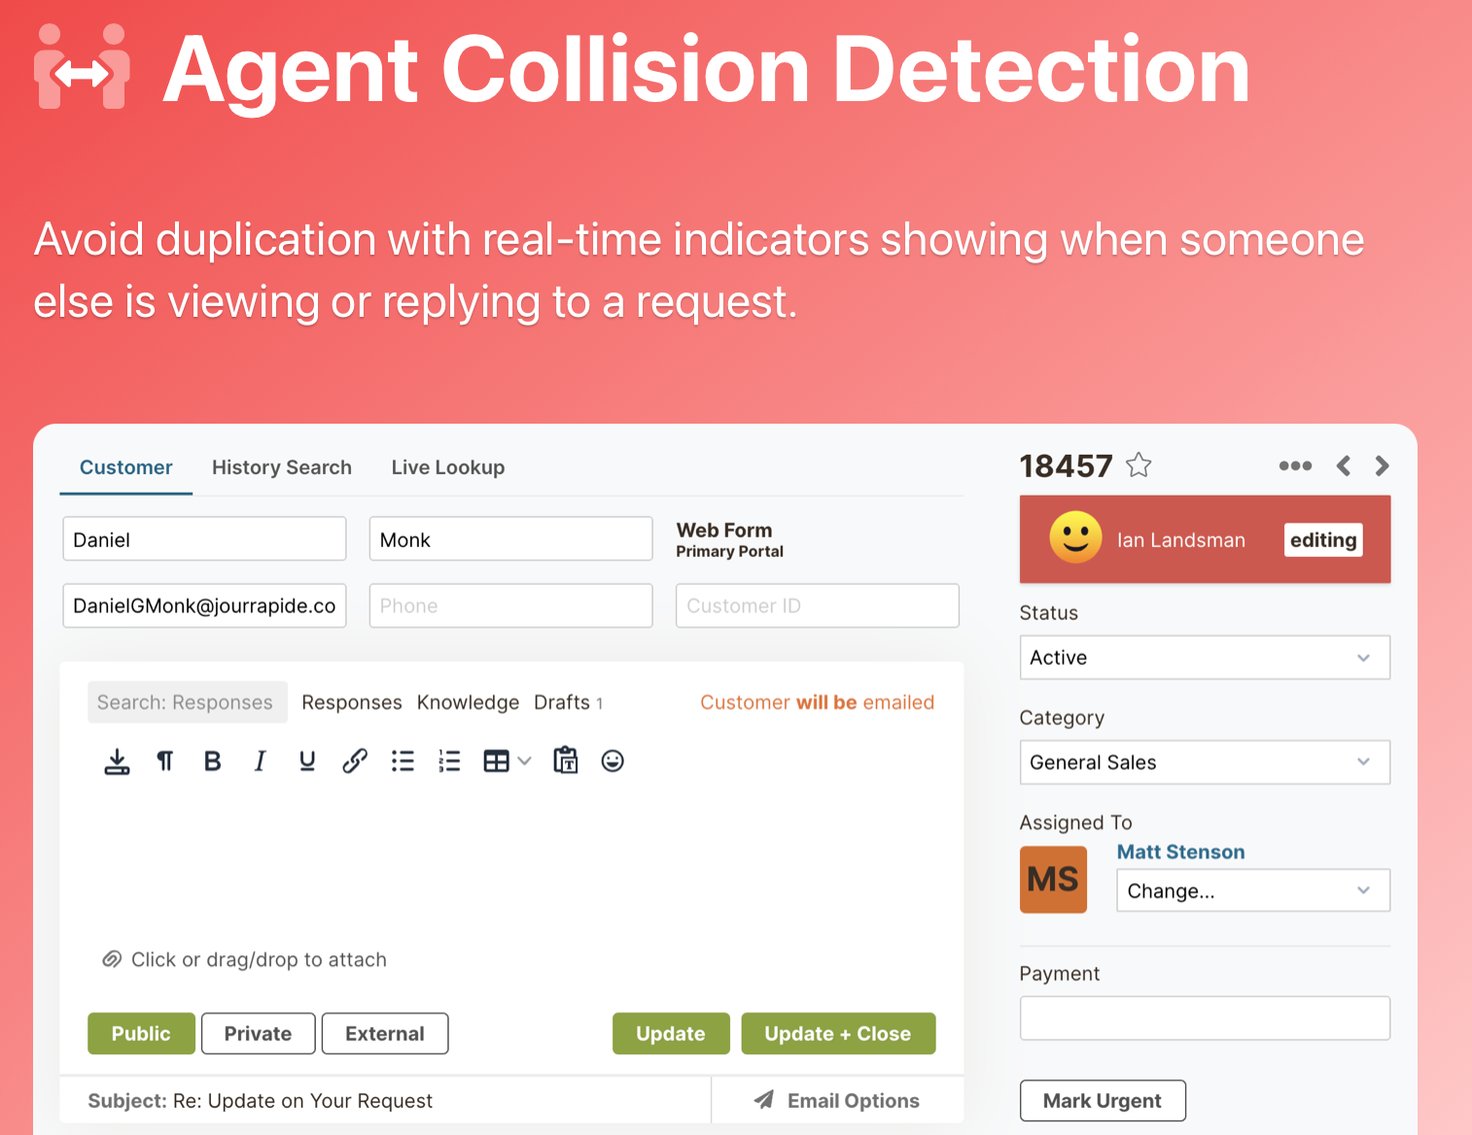 Agent Collision Detection prevents two agents from responding to the same request.